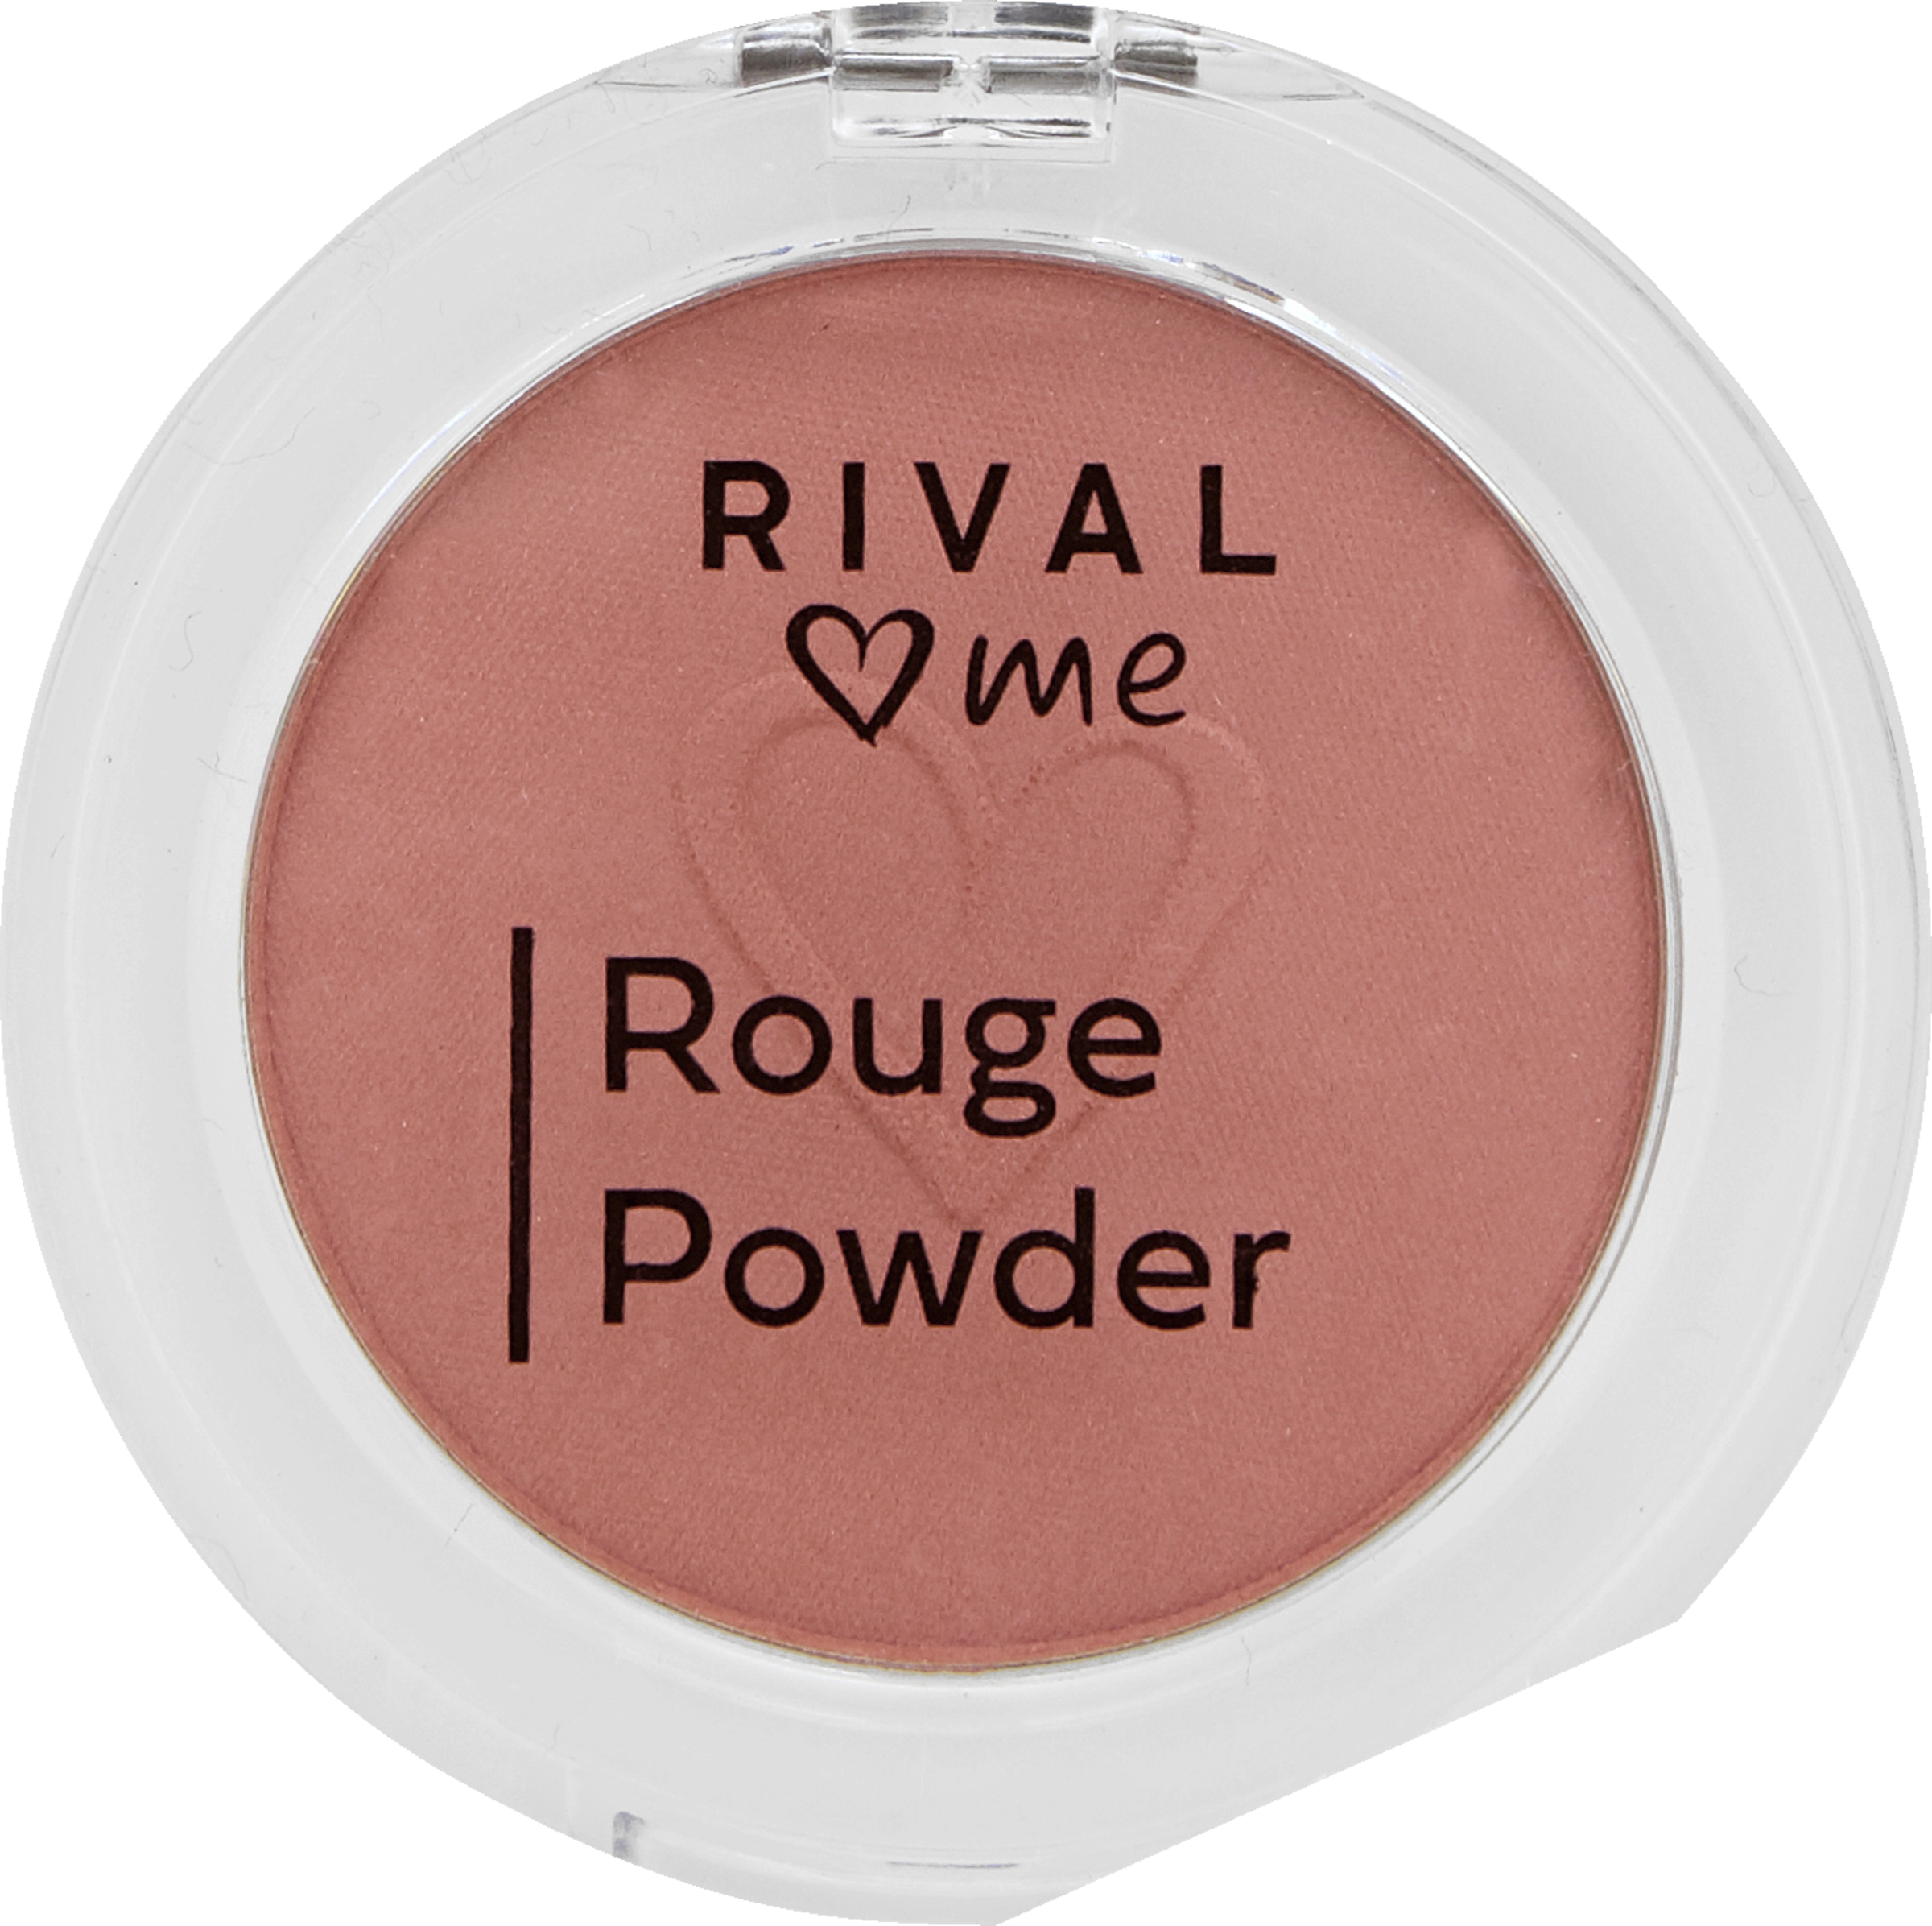 RIVAL loves me Rouge 02 light apricot